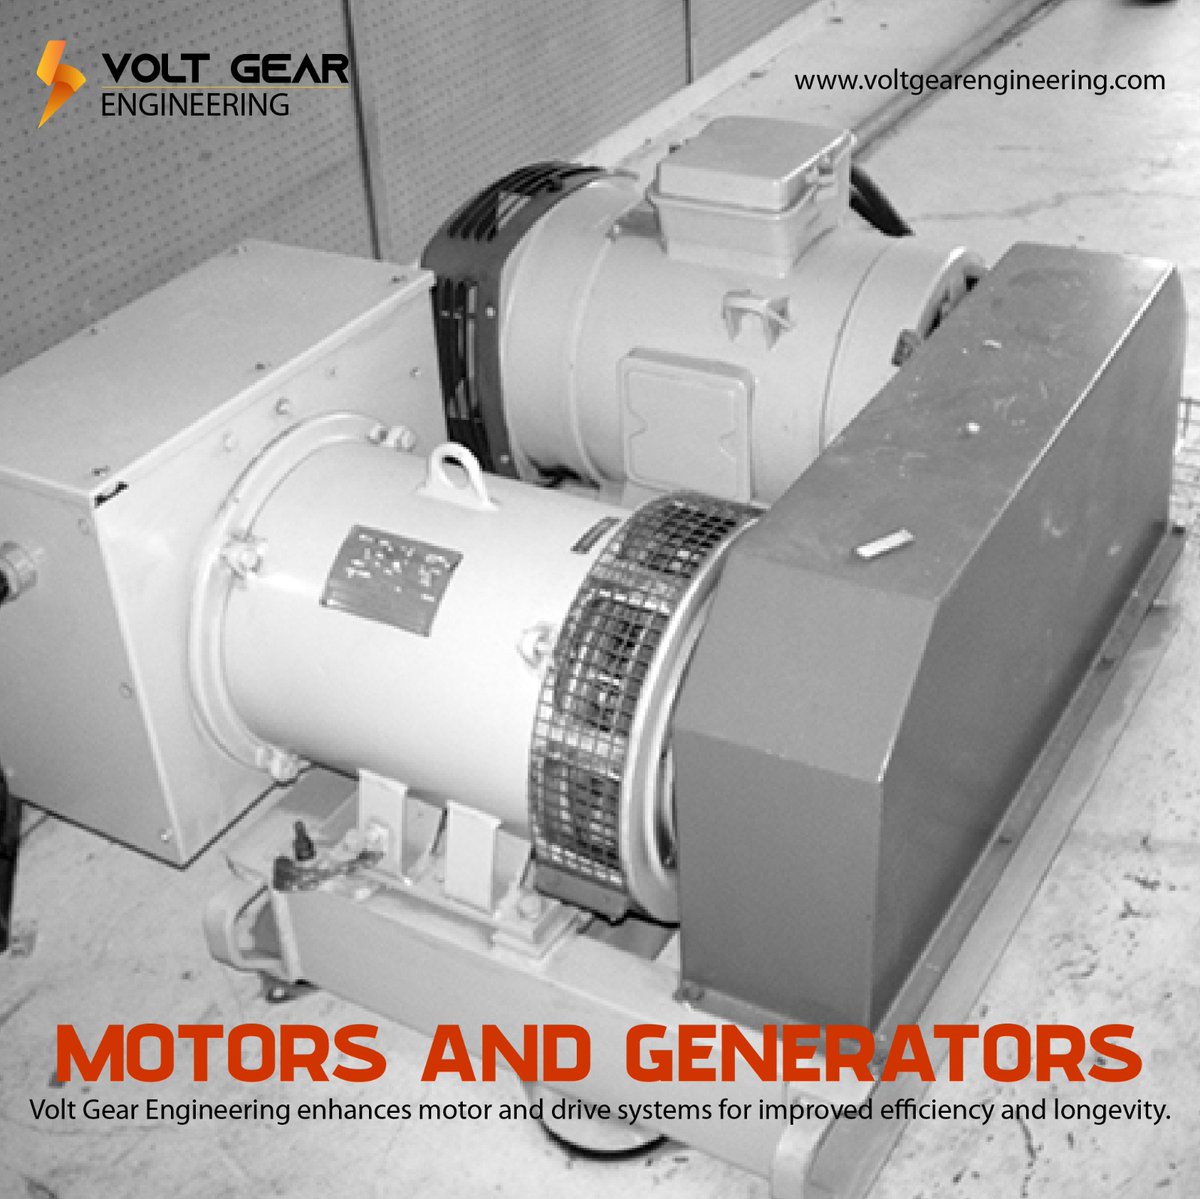 Empower your operations with our cutting-edge motor and generator solutions!  From seamless efficiency to reliable power, we've got you covered. 
.
.
#motorsandgenerators #voltgearengineering #powerup